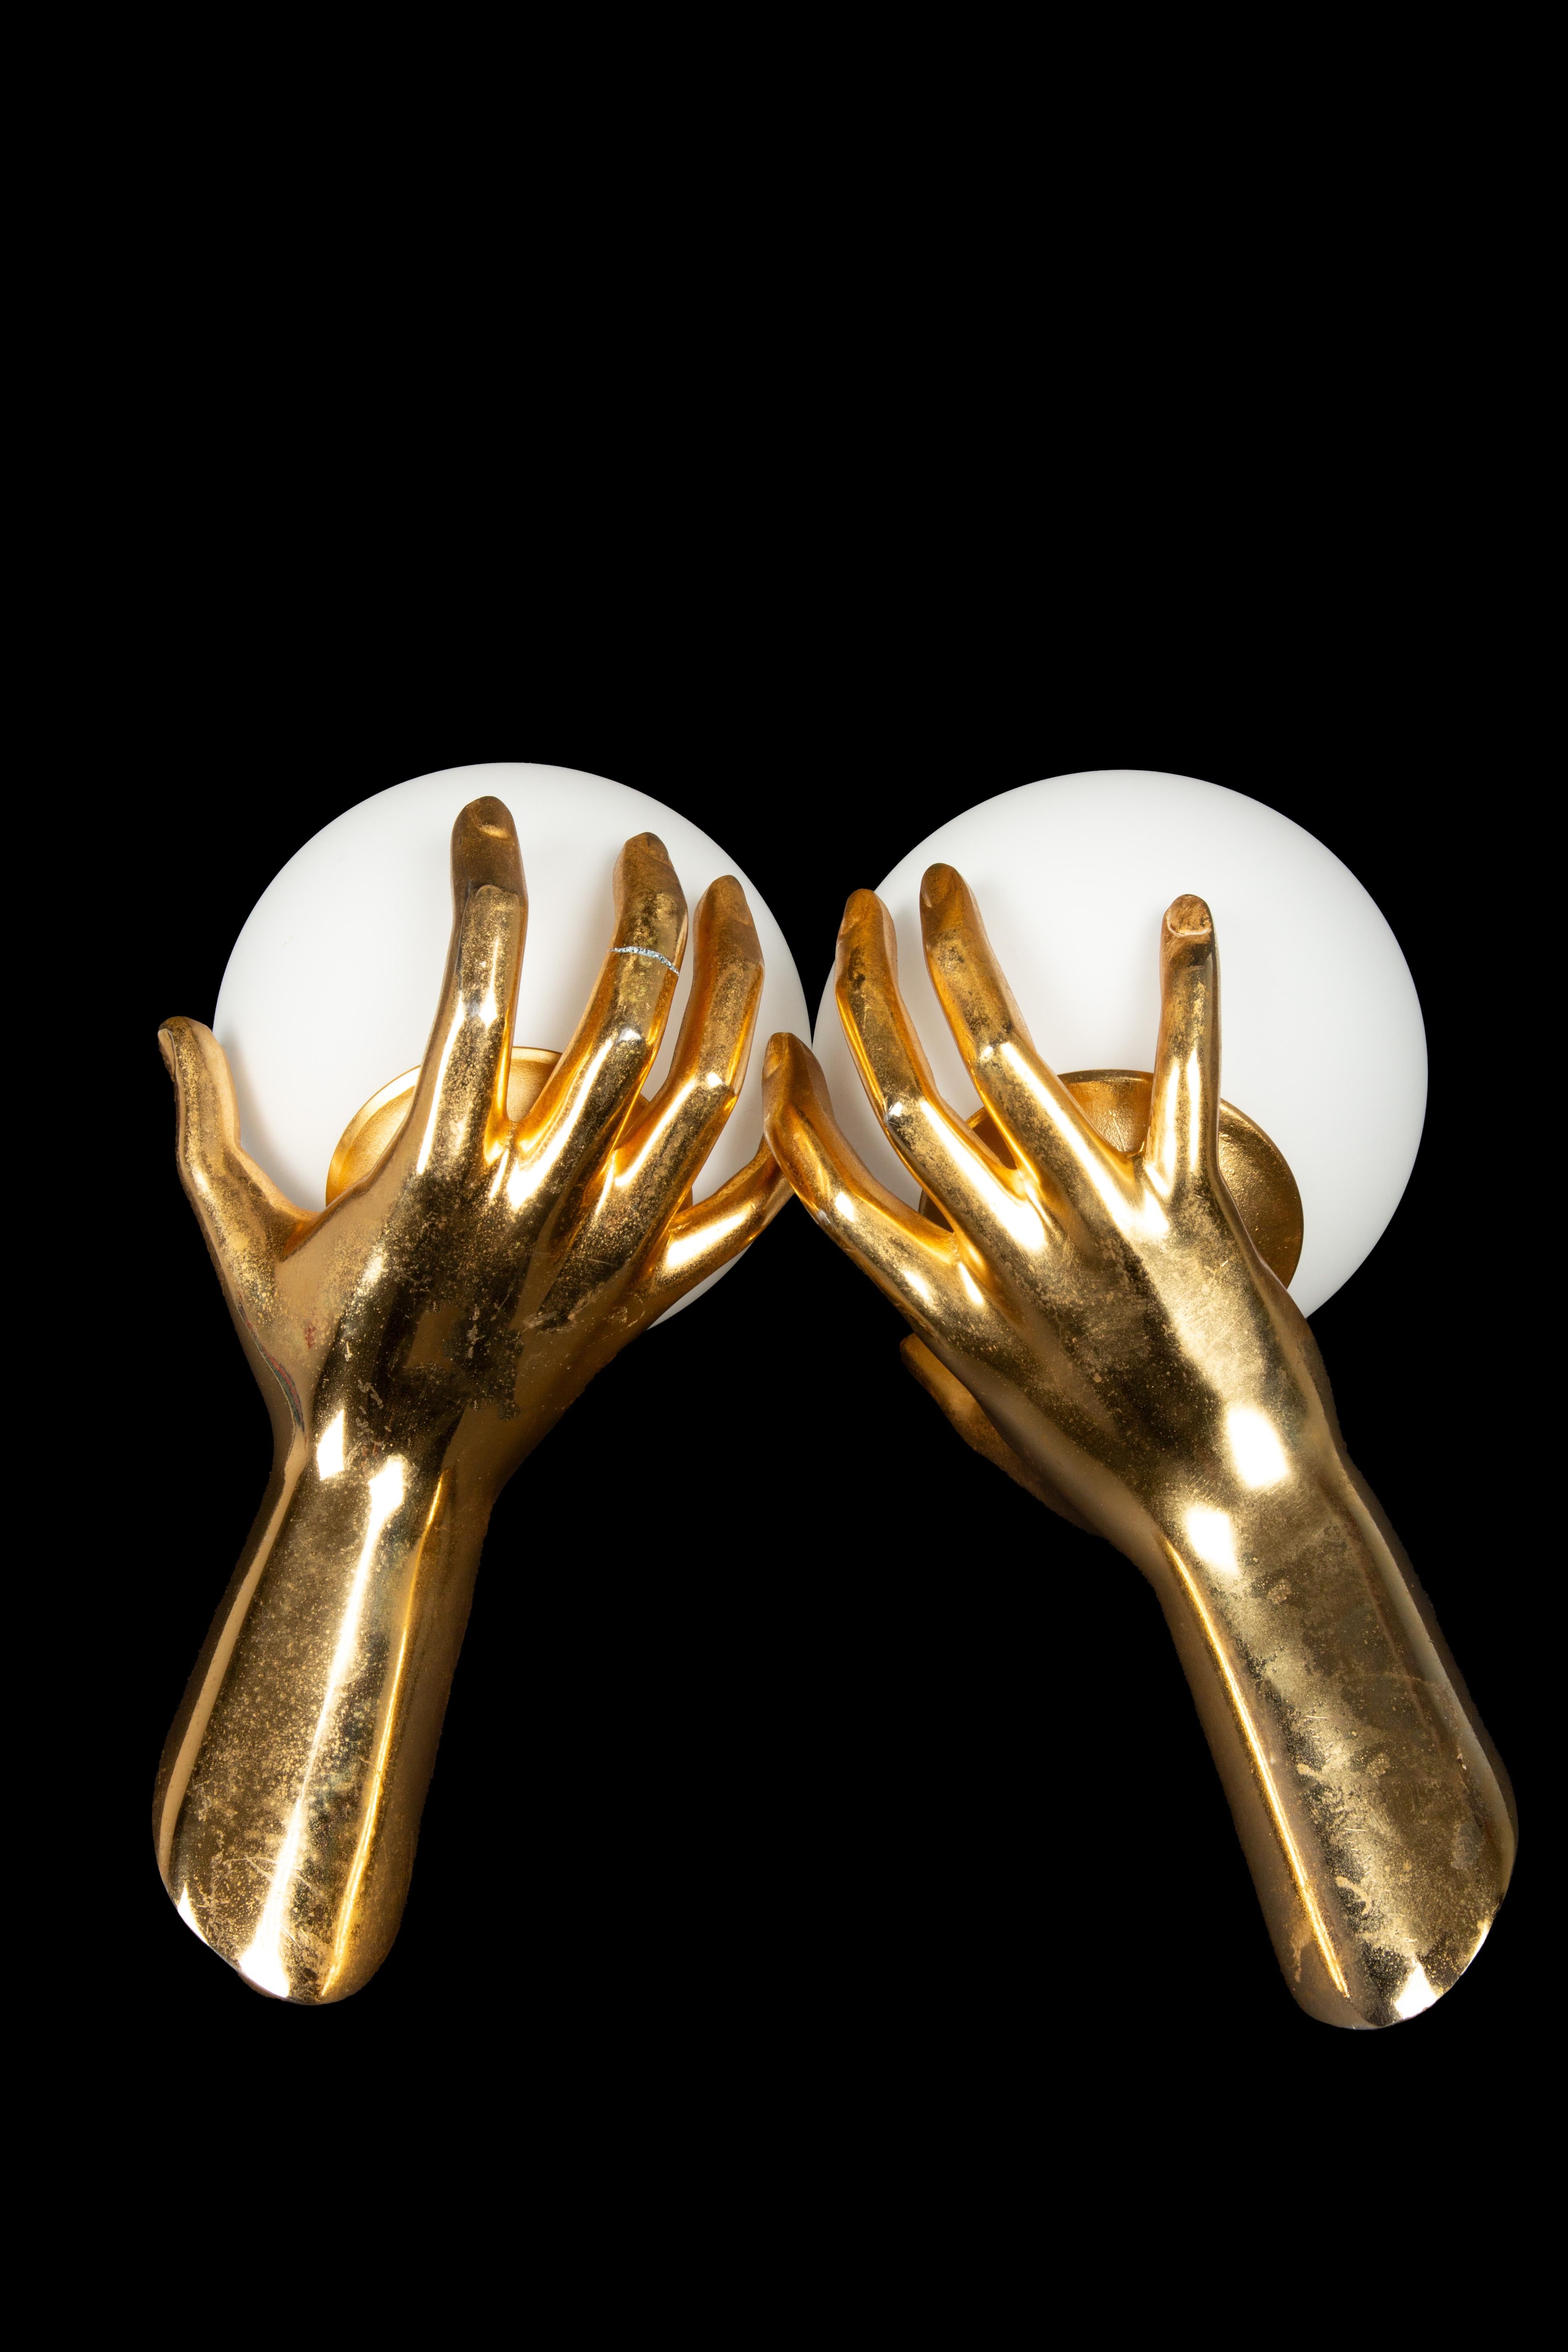 Exquisite and exceedingly rare pair of gilt bronze hand sconces crafted by Maison Arlus. These remarkable pieces, model number 1436, feature a captivating design depicting a finely detailed bronze hand delicately cradling a softly illuminated